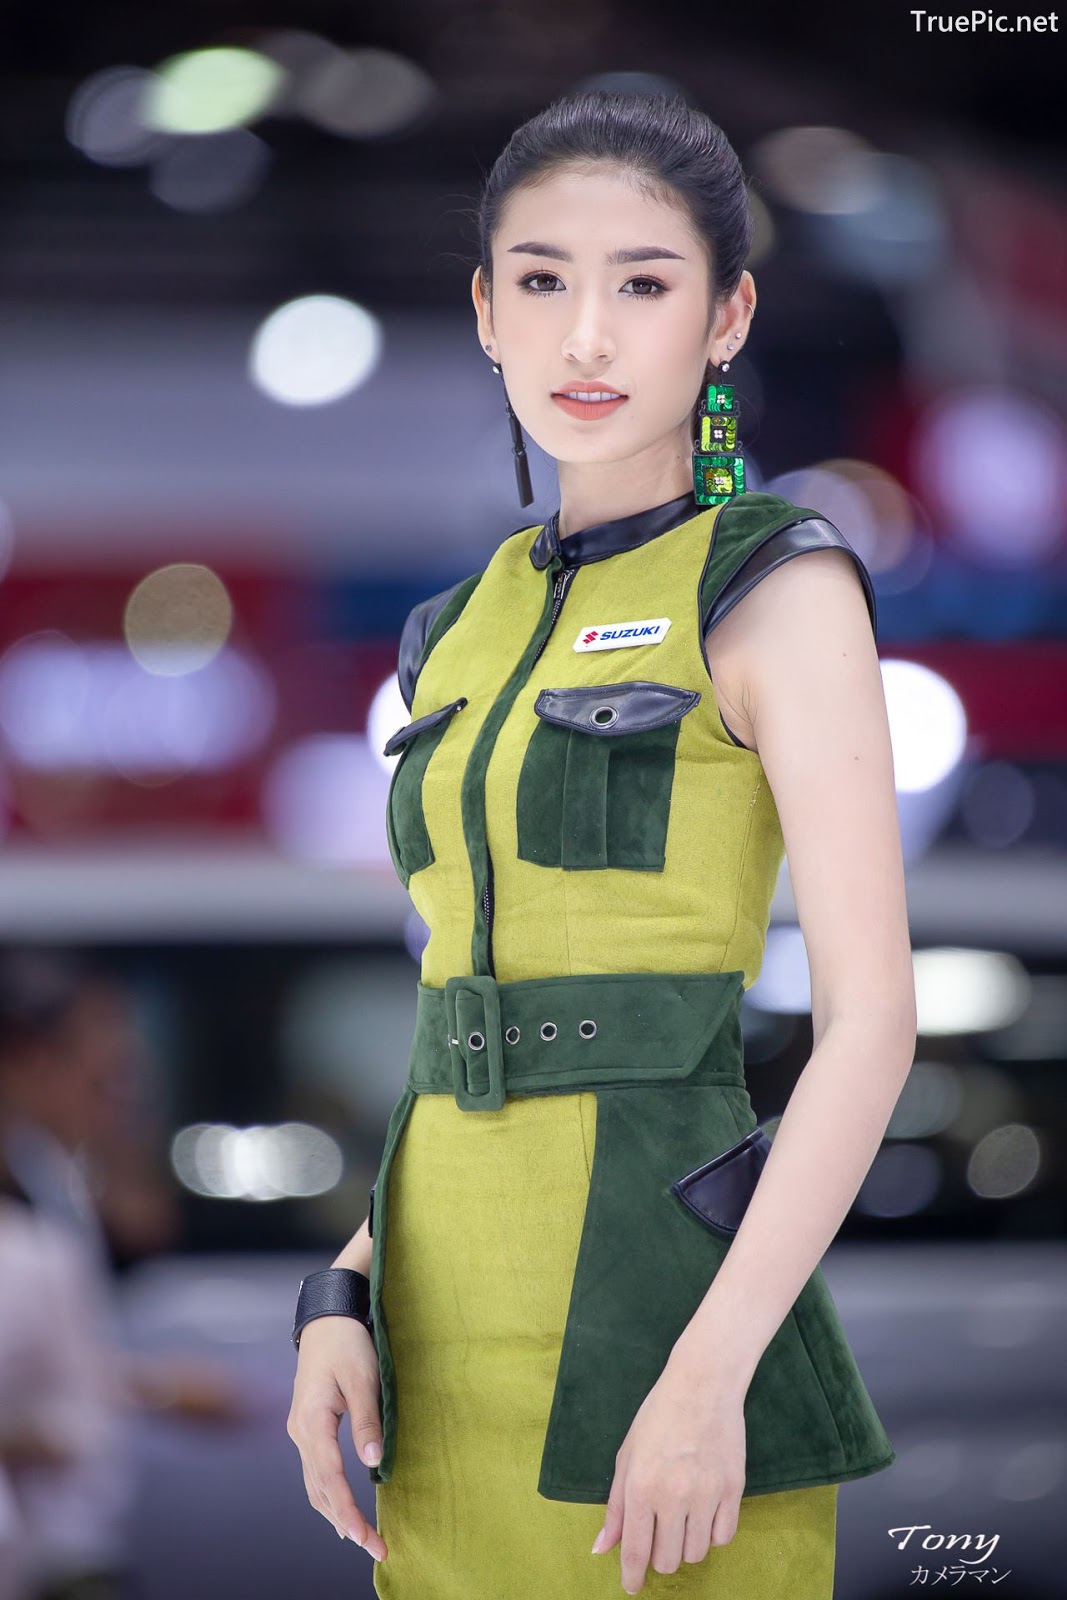 Image-Thailand-Hot-Model-Thai-Racing-Girl-At-Motor-Show-2019-TruePic.net- Picture-62